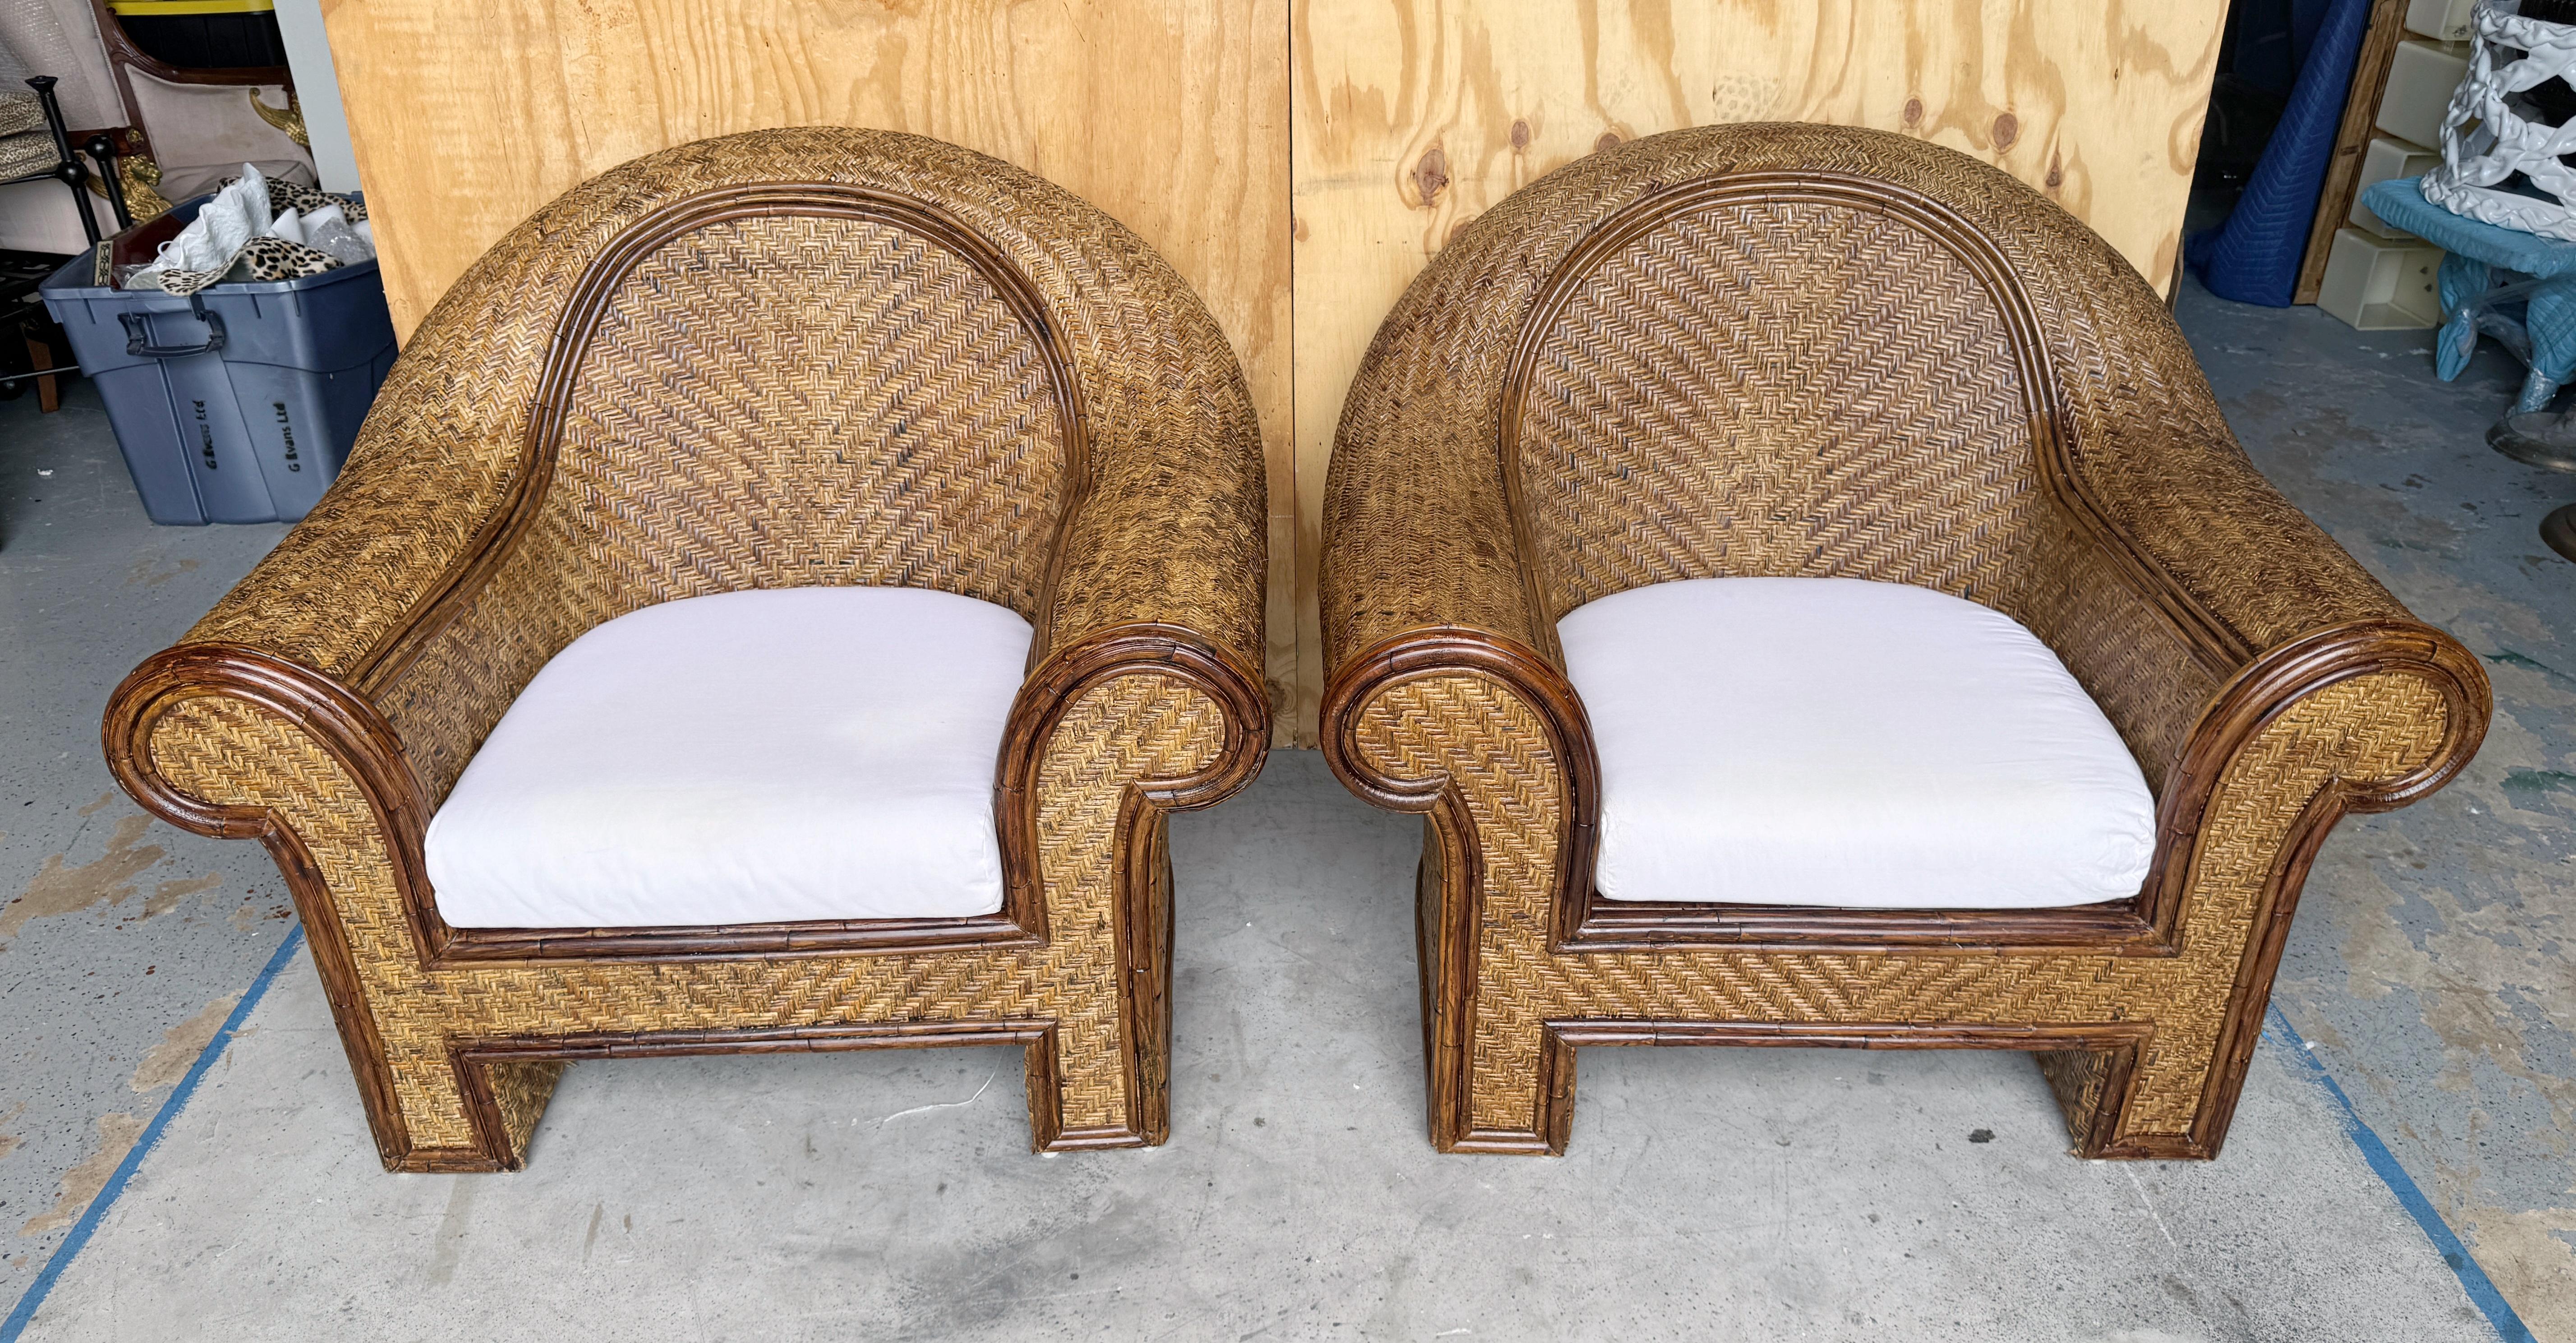 Pair of Coastal Rattan & Reed Woven Club Chairs, attributed to Ralph Lauren 

We are pleased to offer this pair of  Coastal Rattan & Reed Woven Club Chairs, attributed to the renowned designer Ralph Lauren. These  beautiful chairs boast generous